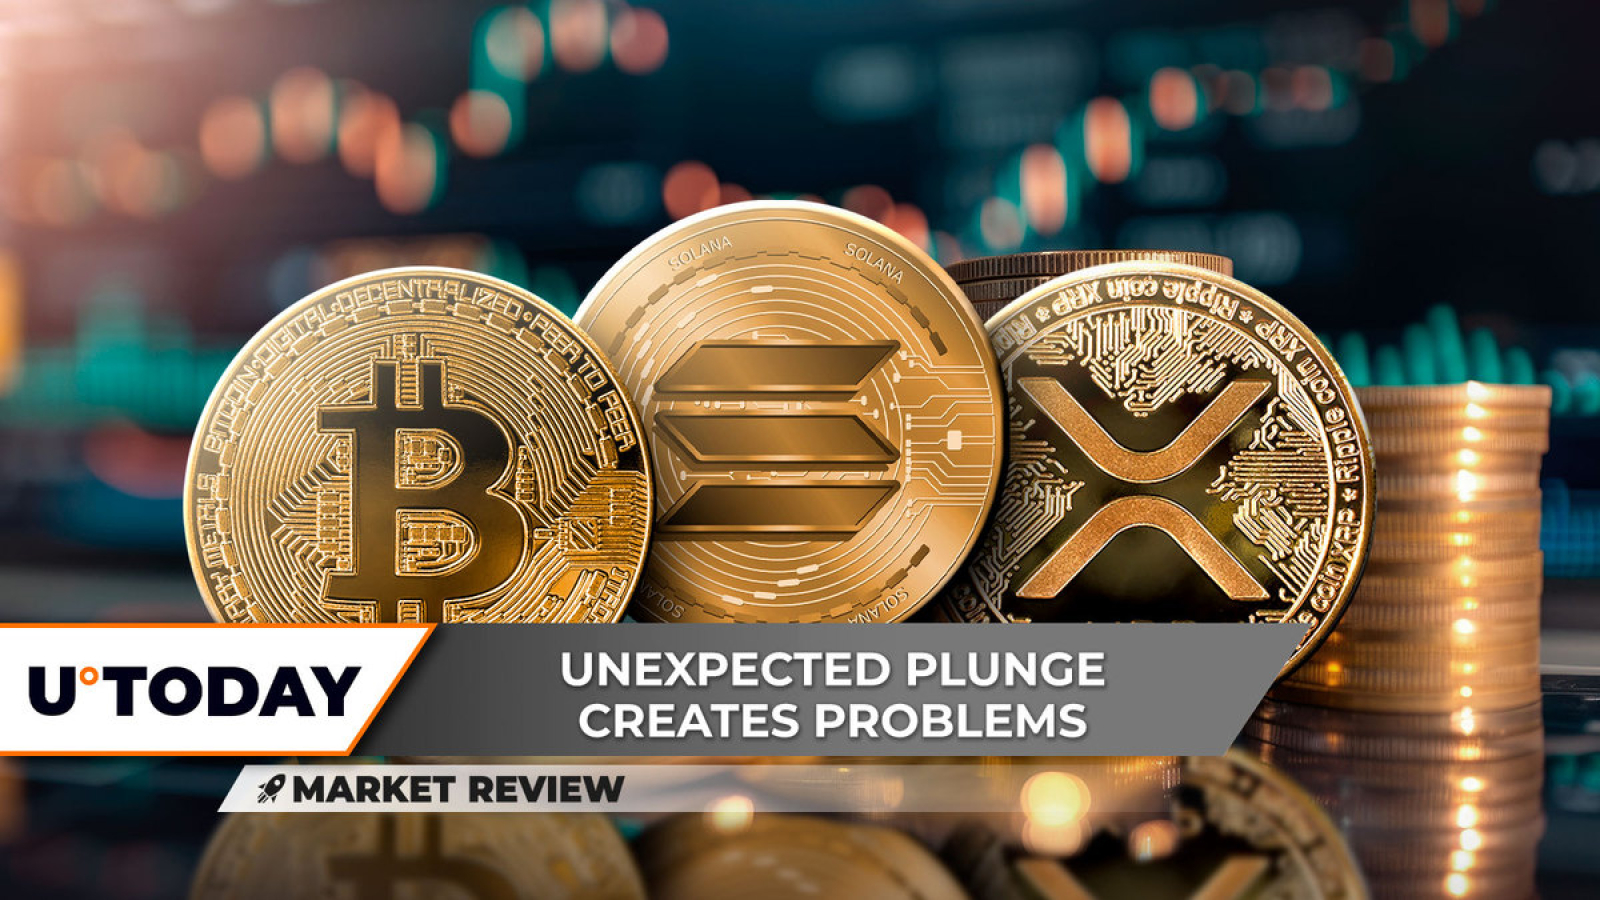 XRP Reached Multi-Month Low, Solana (SOL) on Strongest Support, Bitcoin (BTC) Price Drop Is Better Than You Think